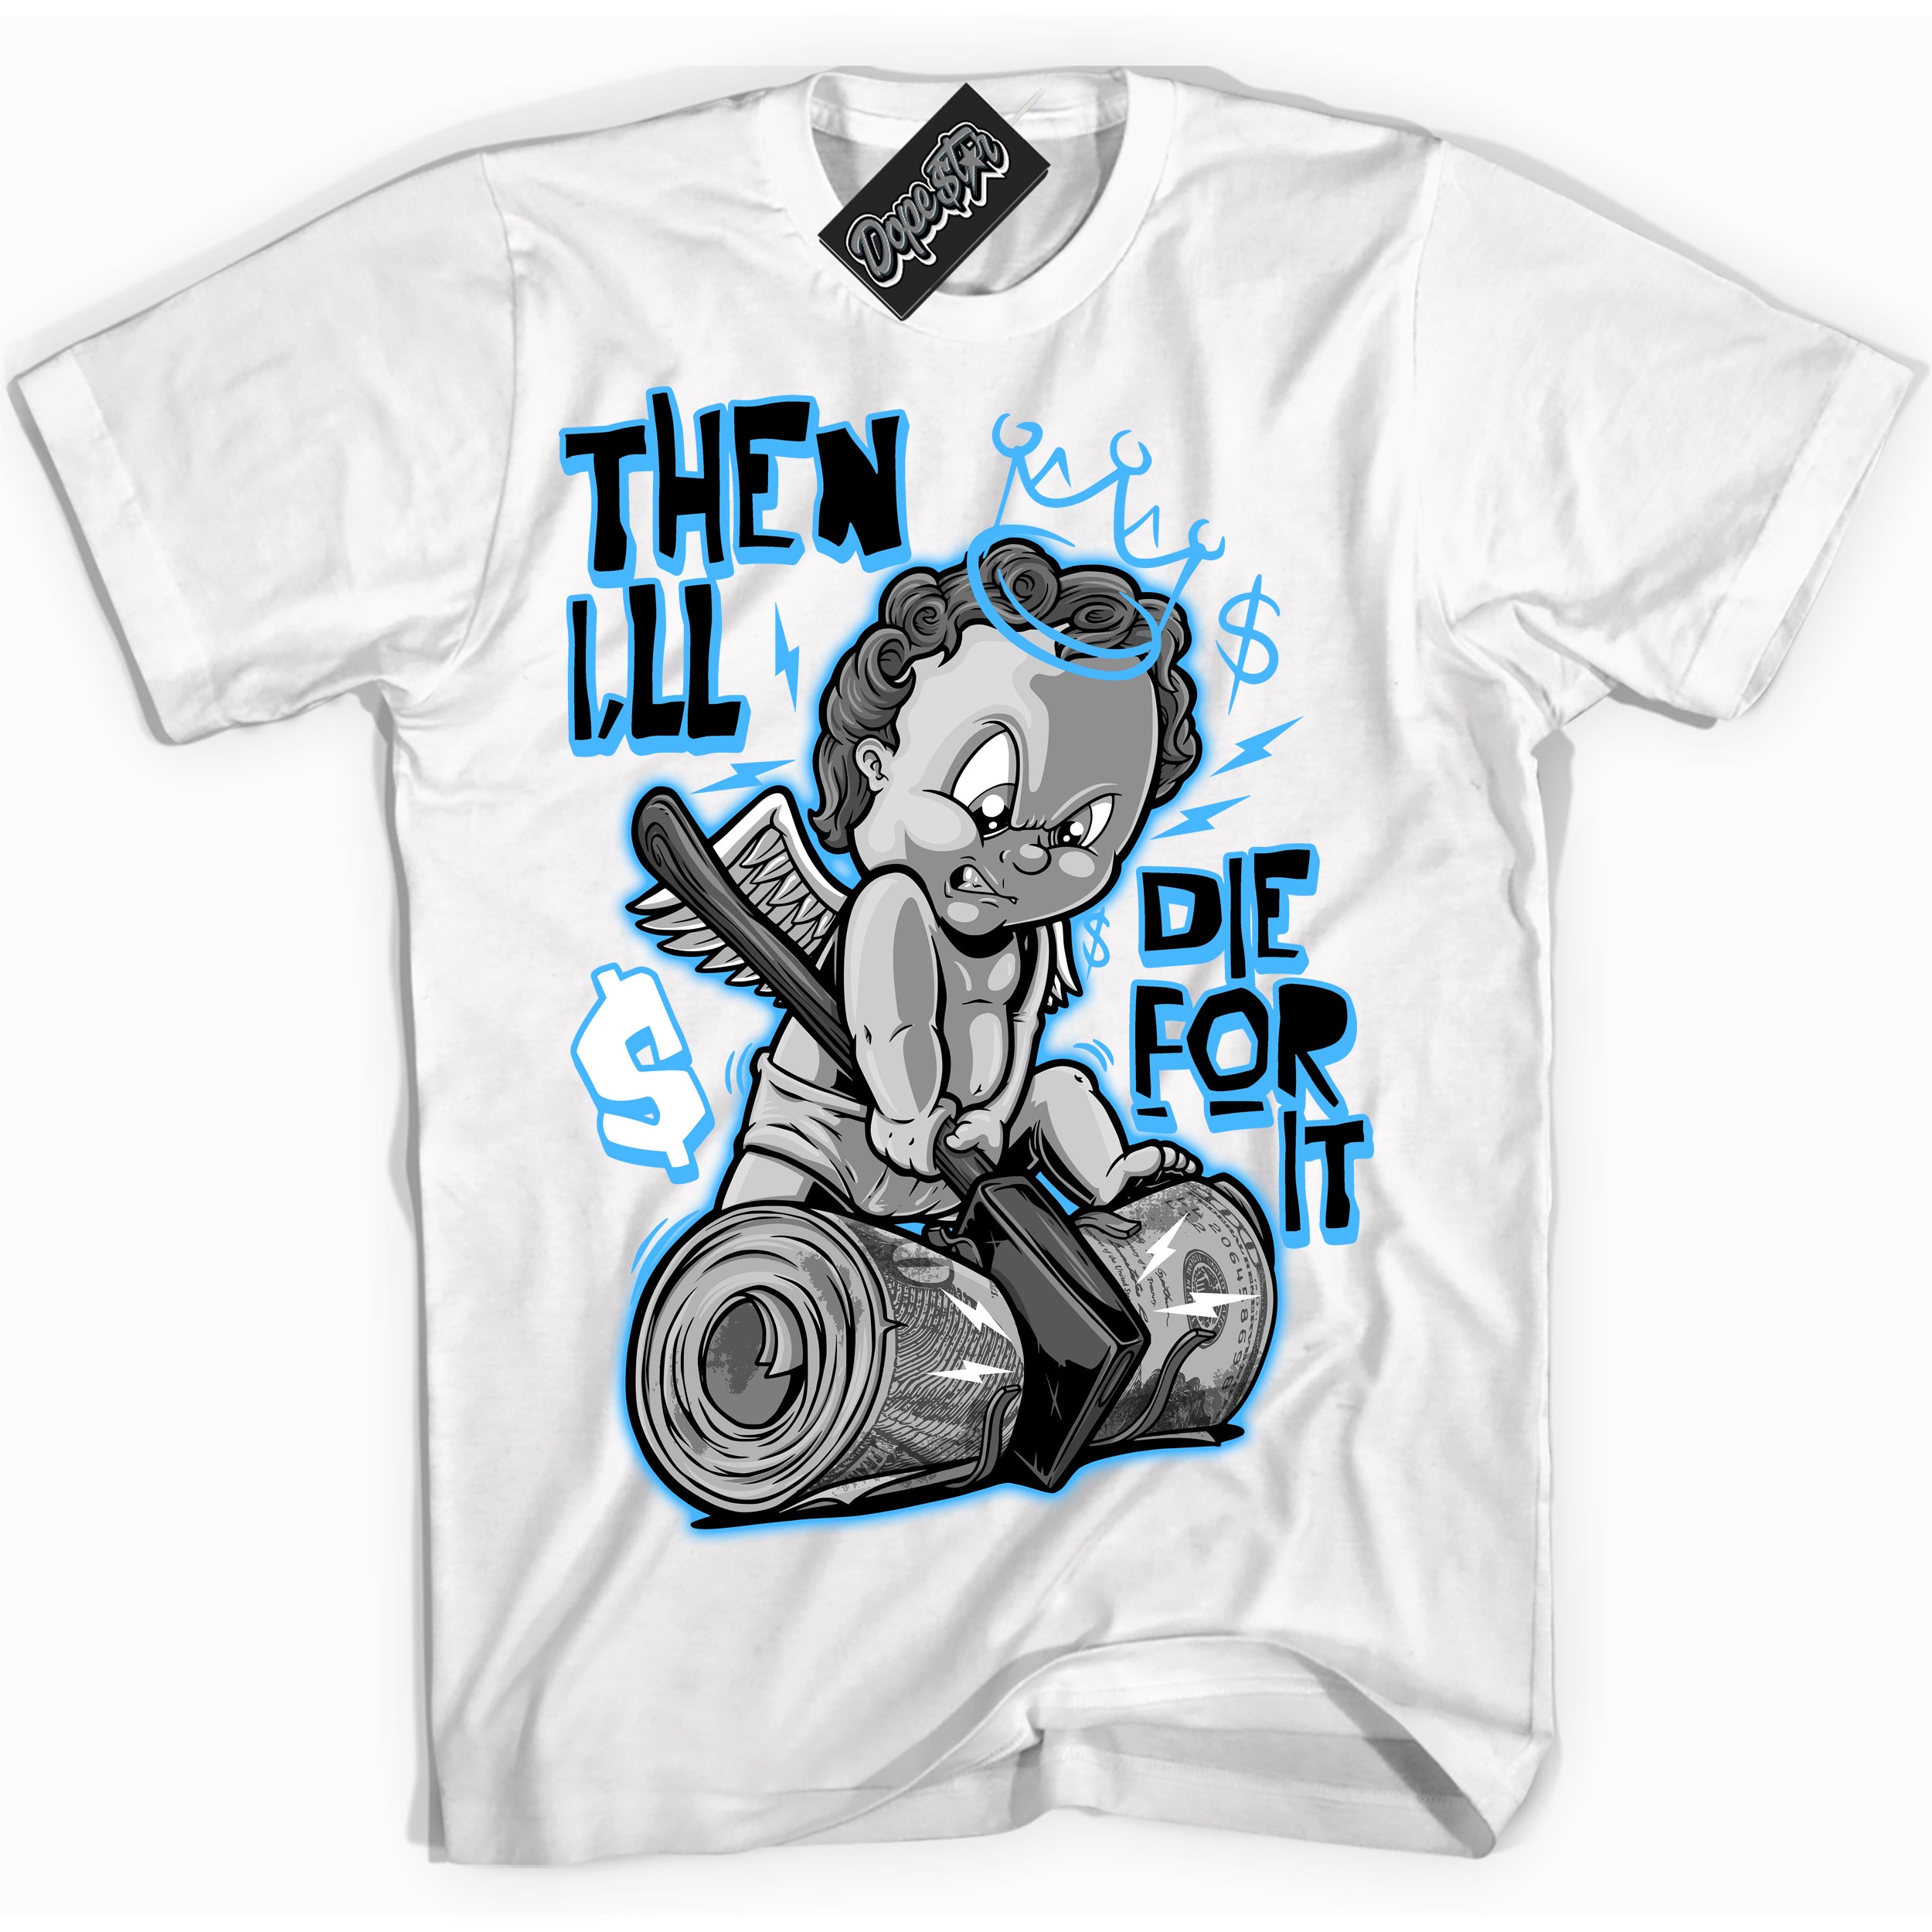 Cool White graphic tee with “ Then I'll ” design, that perfectly matches Powder Blue 9s sneakers 